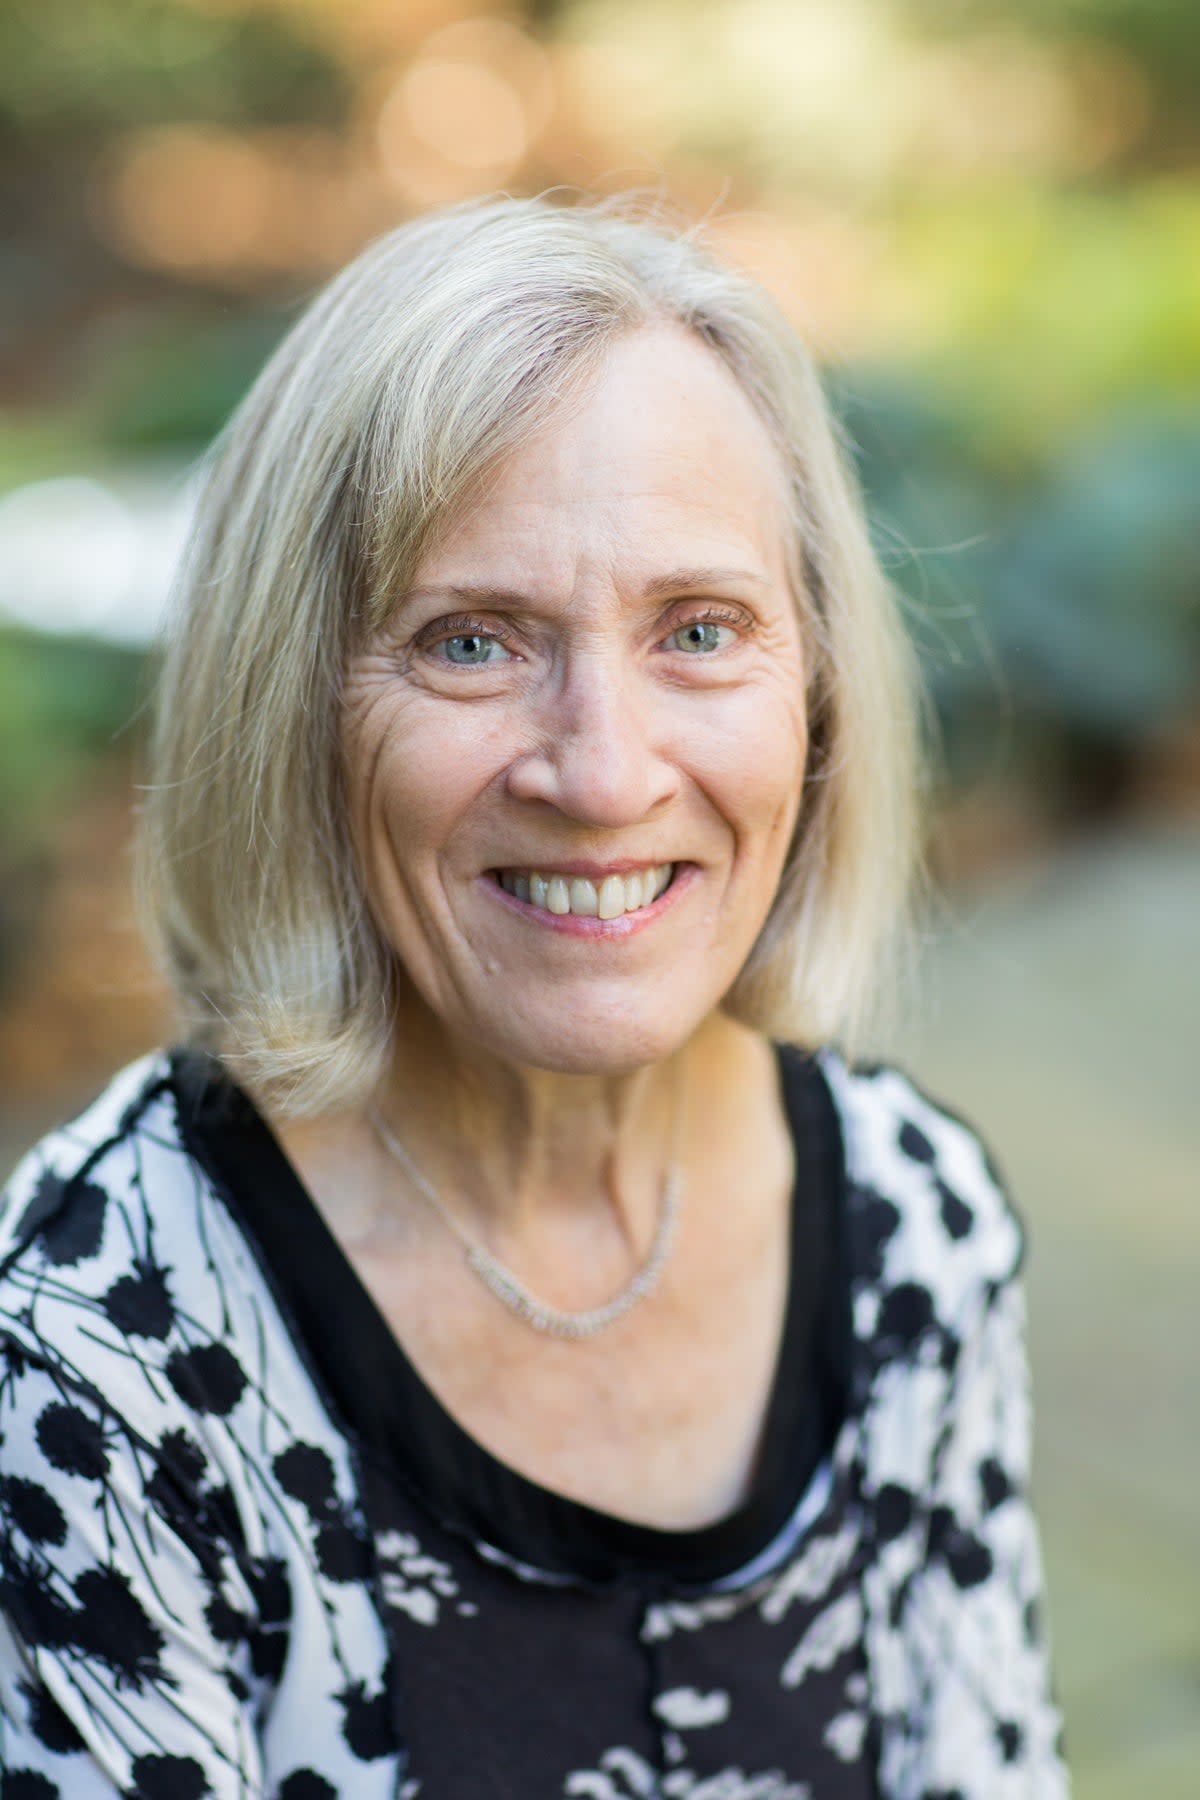 Harvard professor Claudia Goldin has spent decades studying history, economics and women in the workplace (Claudia Goldin)